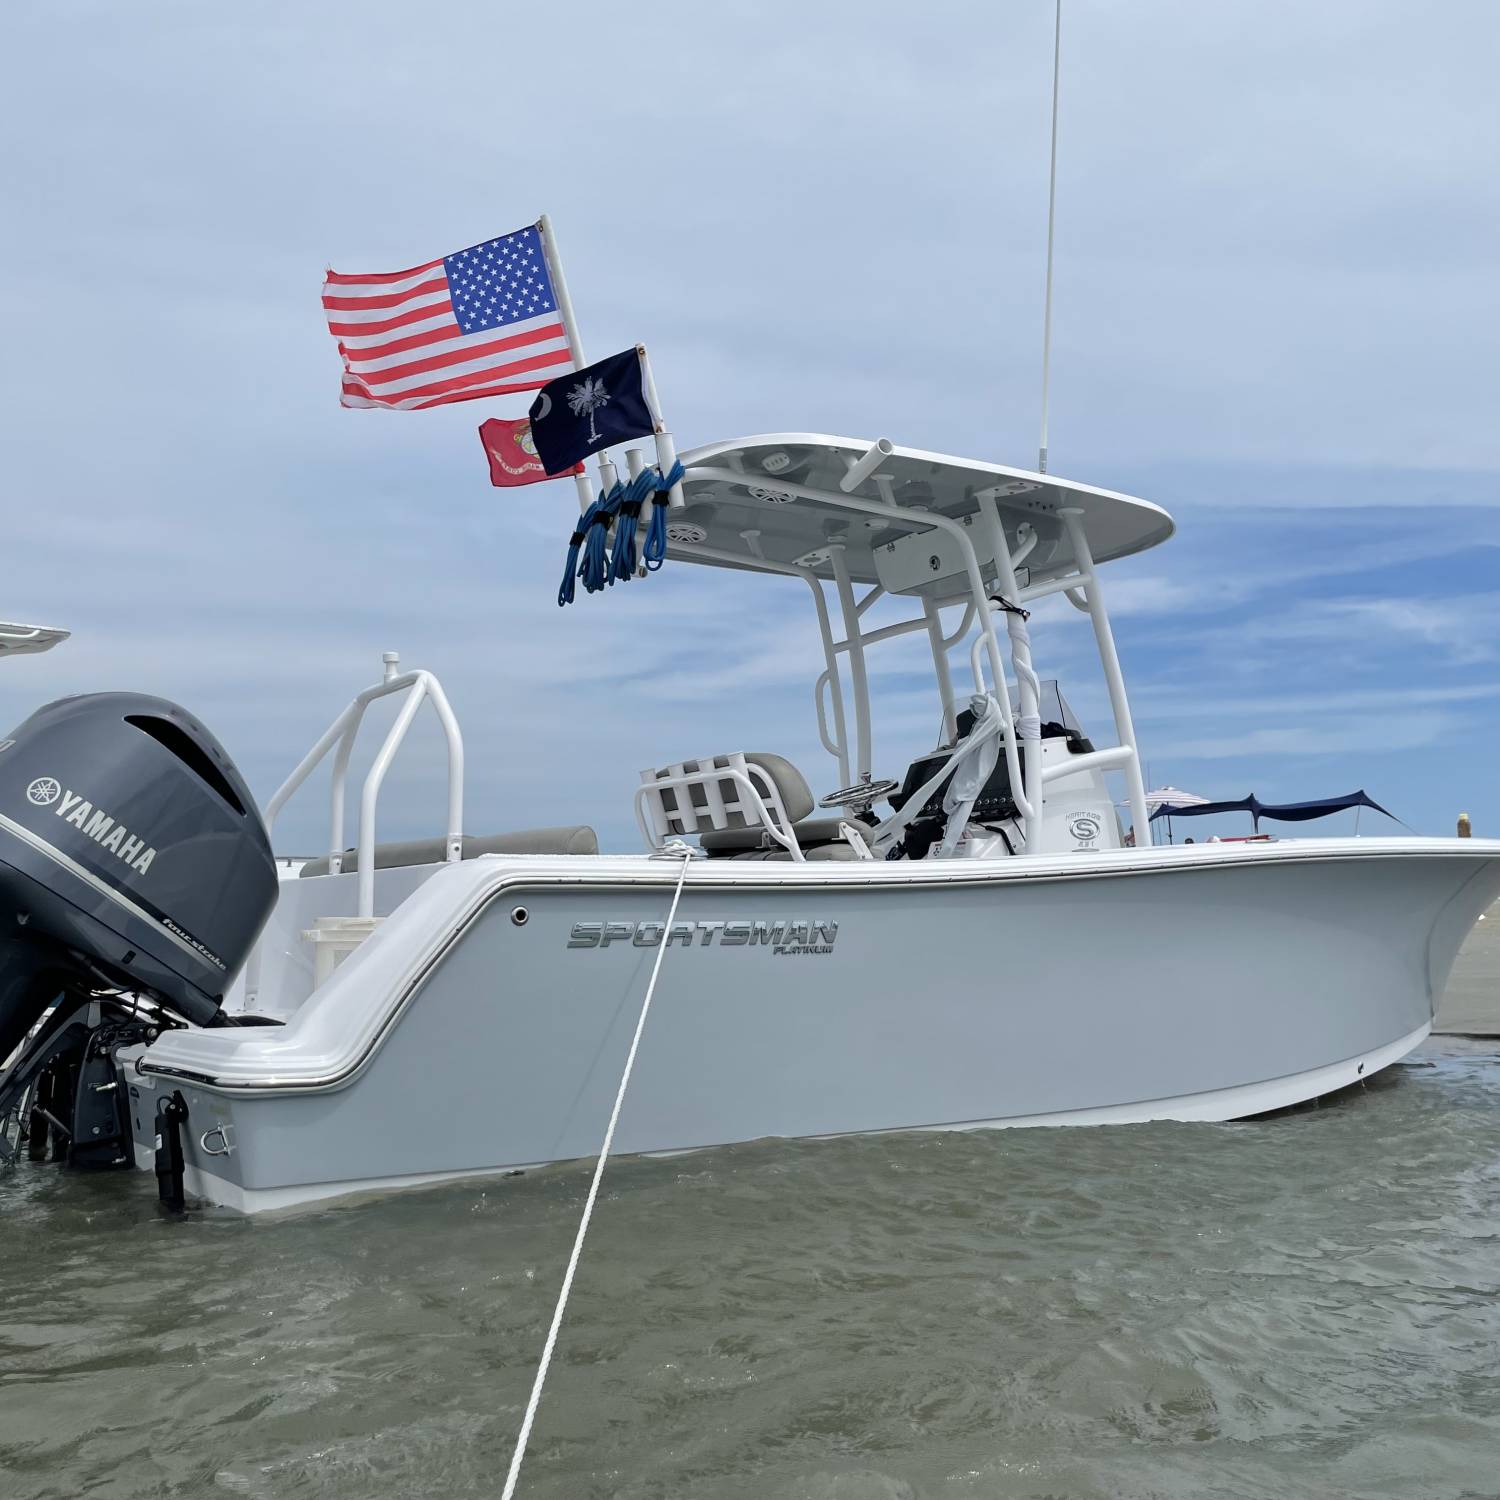 Title: Life’s a Beach - On board their Sportsman Heritage 231 Center Console - Location: Beaufort,SC. Participating in the Photo Contest #SportsmanOctober2021